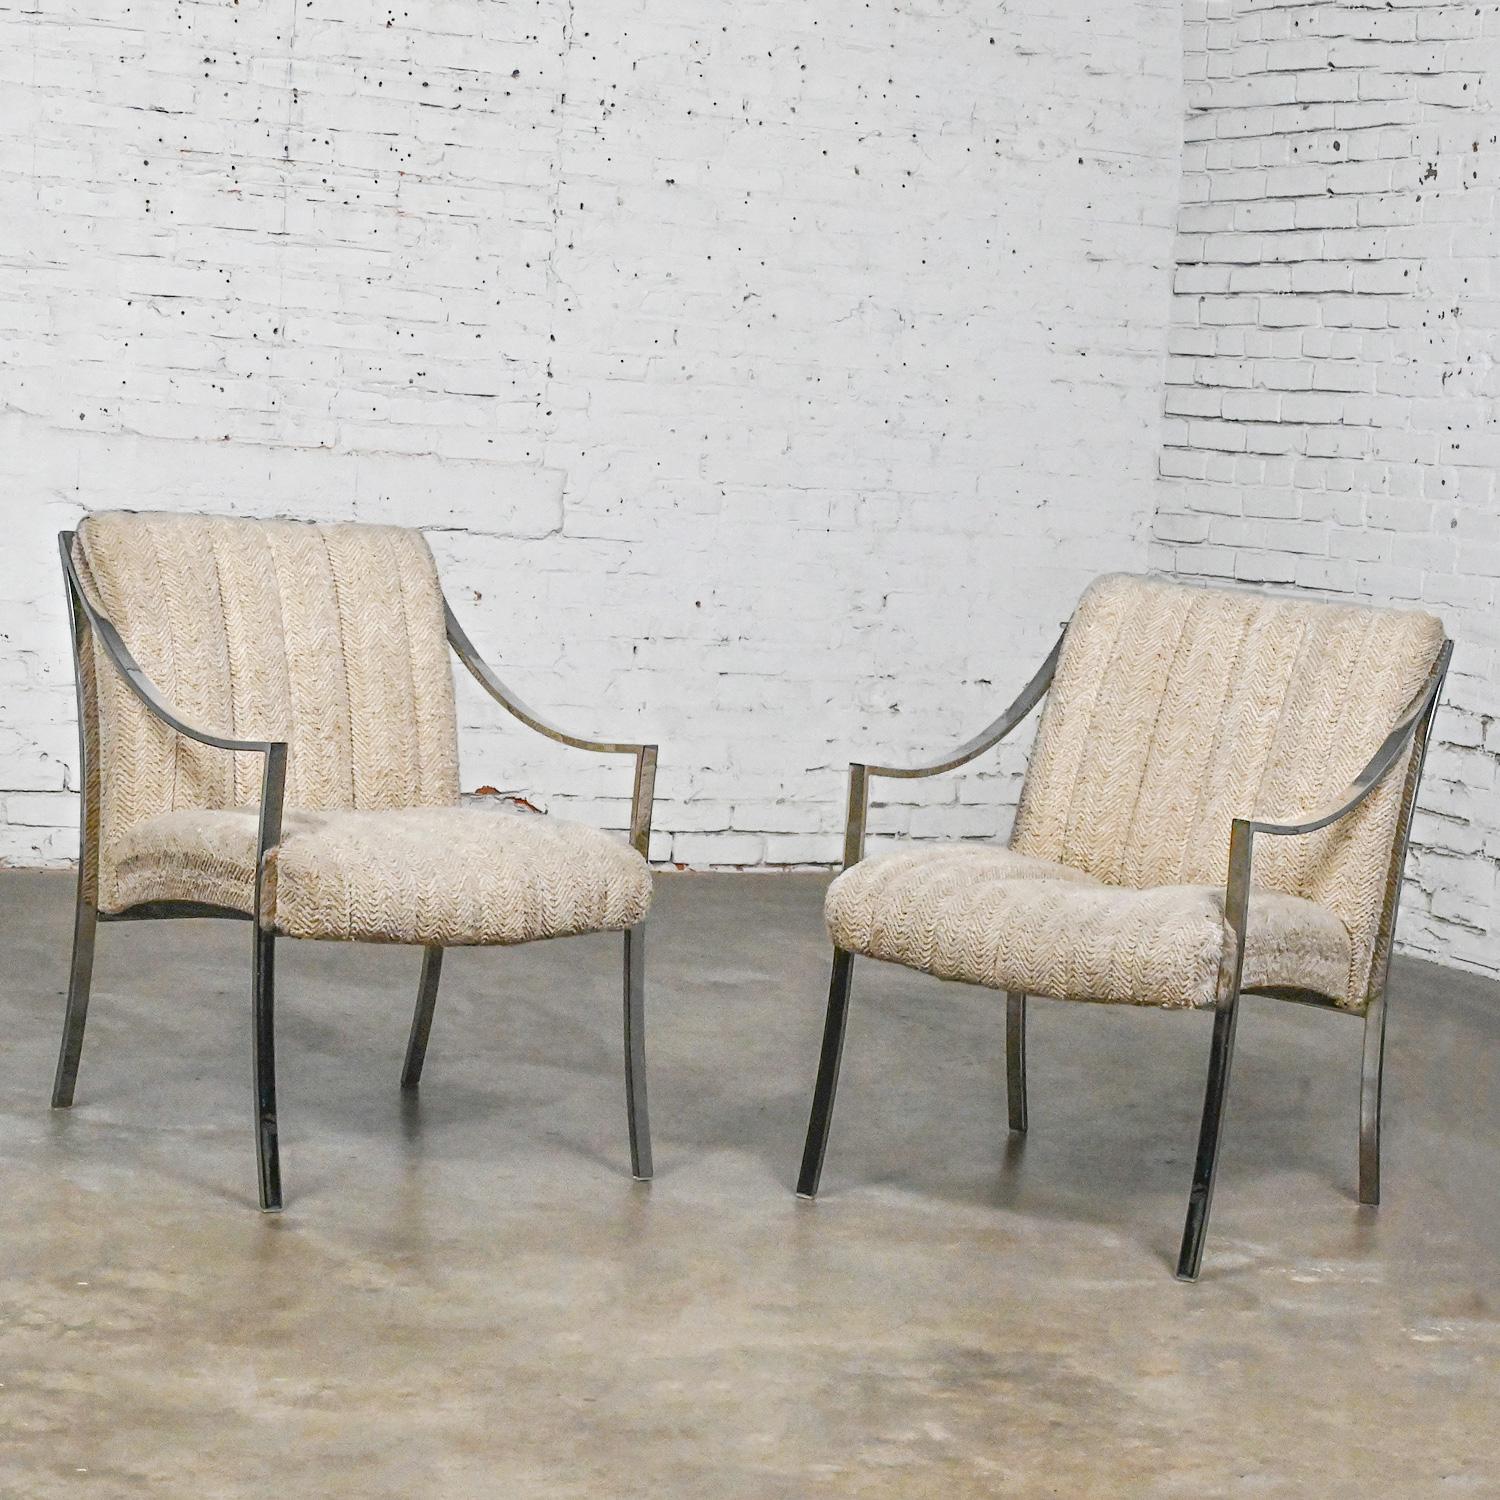 Wonderful MCM (Mid-Century Modern) to Modern Carsons Incorporated accent chairs with rectangular chrome tube frames and original oatmeal herringbone fabric, a pair. Beautiful condition, keeping in mind that these are vintage and not new so will have